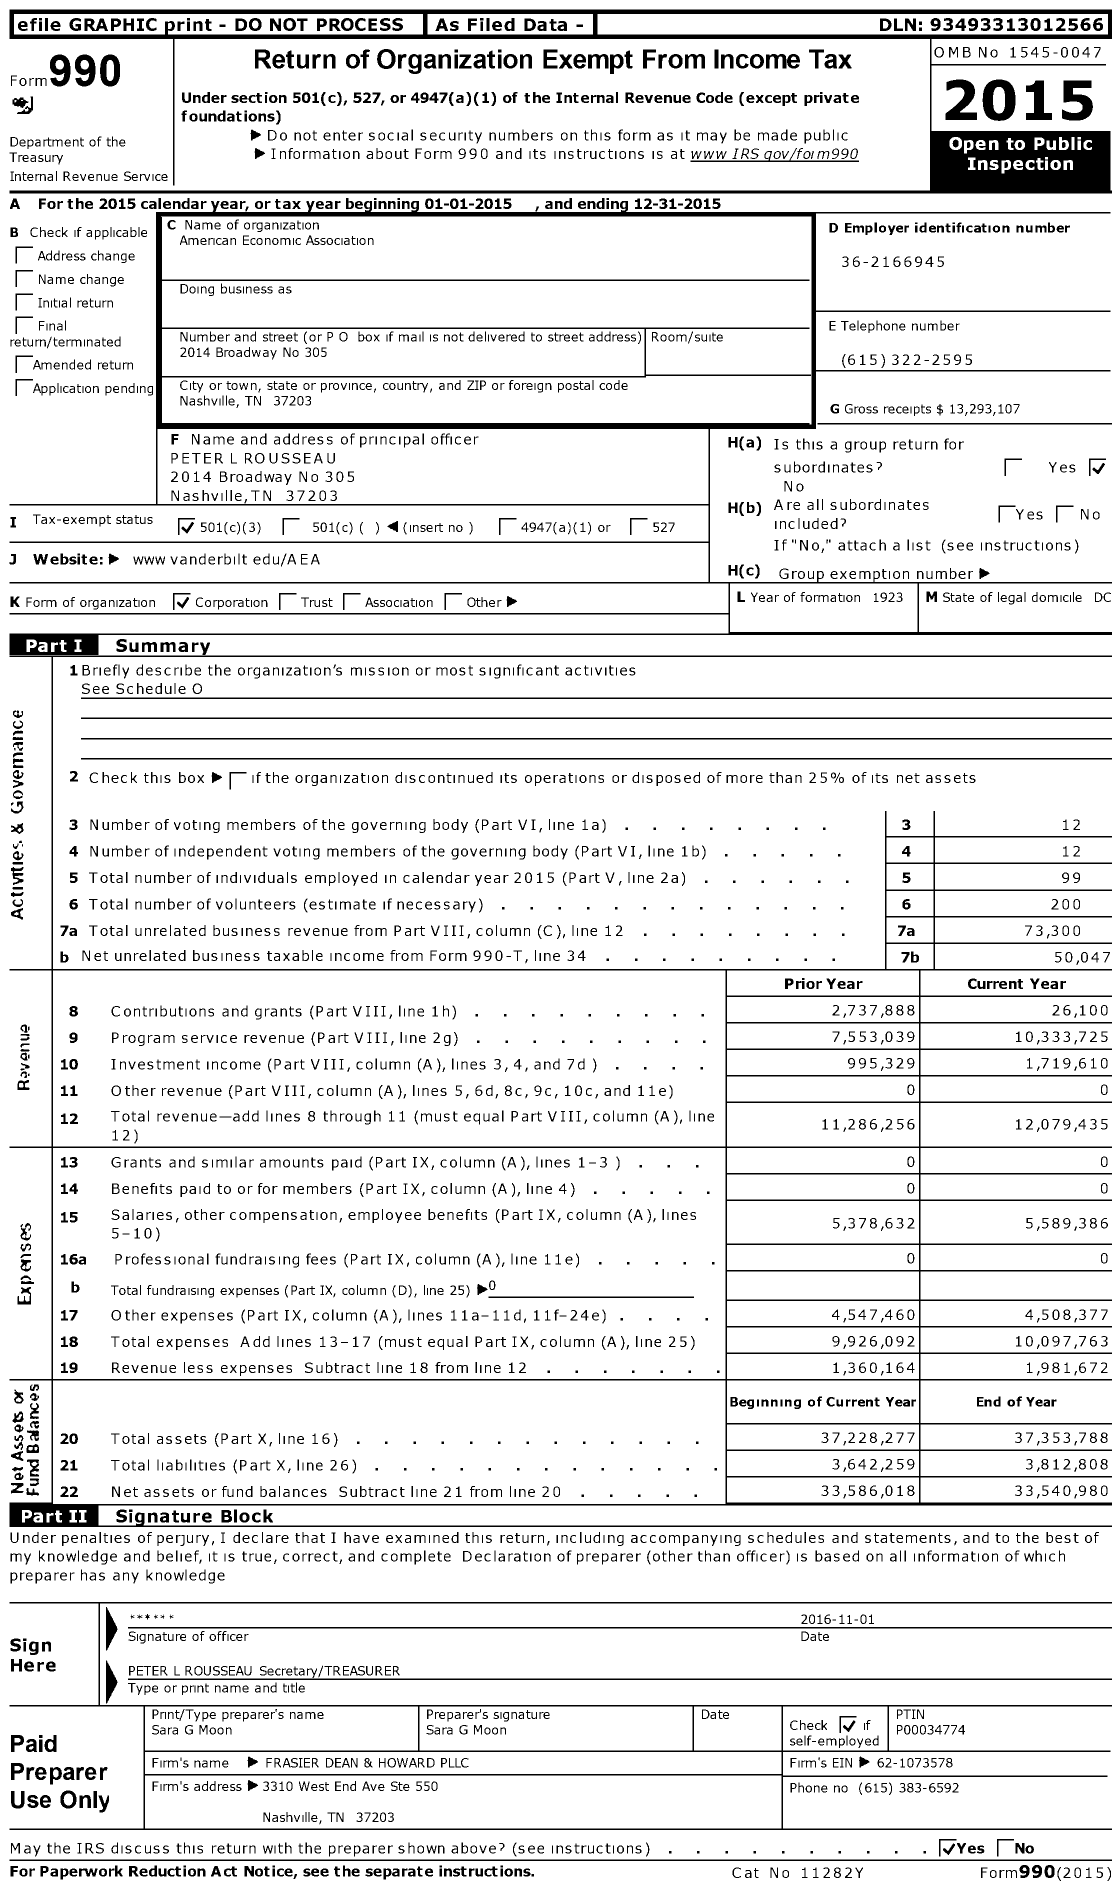 Image of first page of 2015 Form 990 for American Economic Association (AEA)